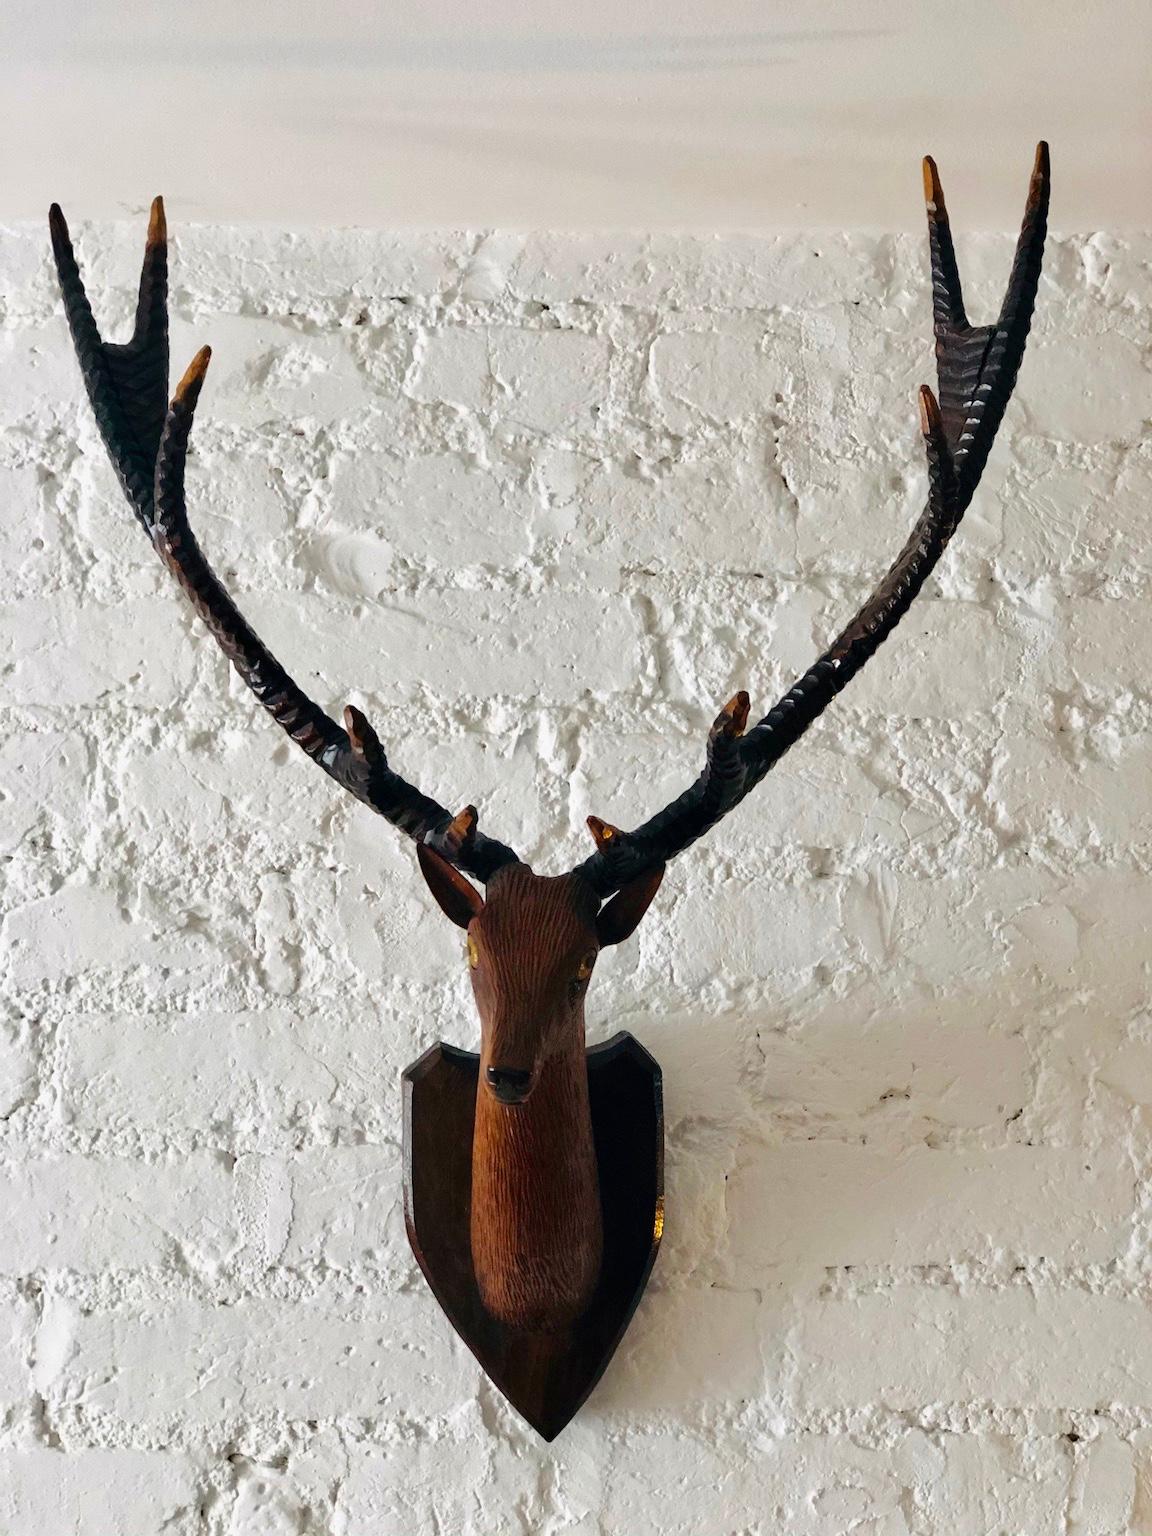 Black Forest carved deer or stag head & antlers mounted on shield plaque, Germany, 1900

Early 20th century Black Forest carved wood stag head with antlers. The antlers and head are all hand carved, mounted onto a shield shape plaque.
The amber